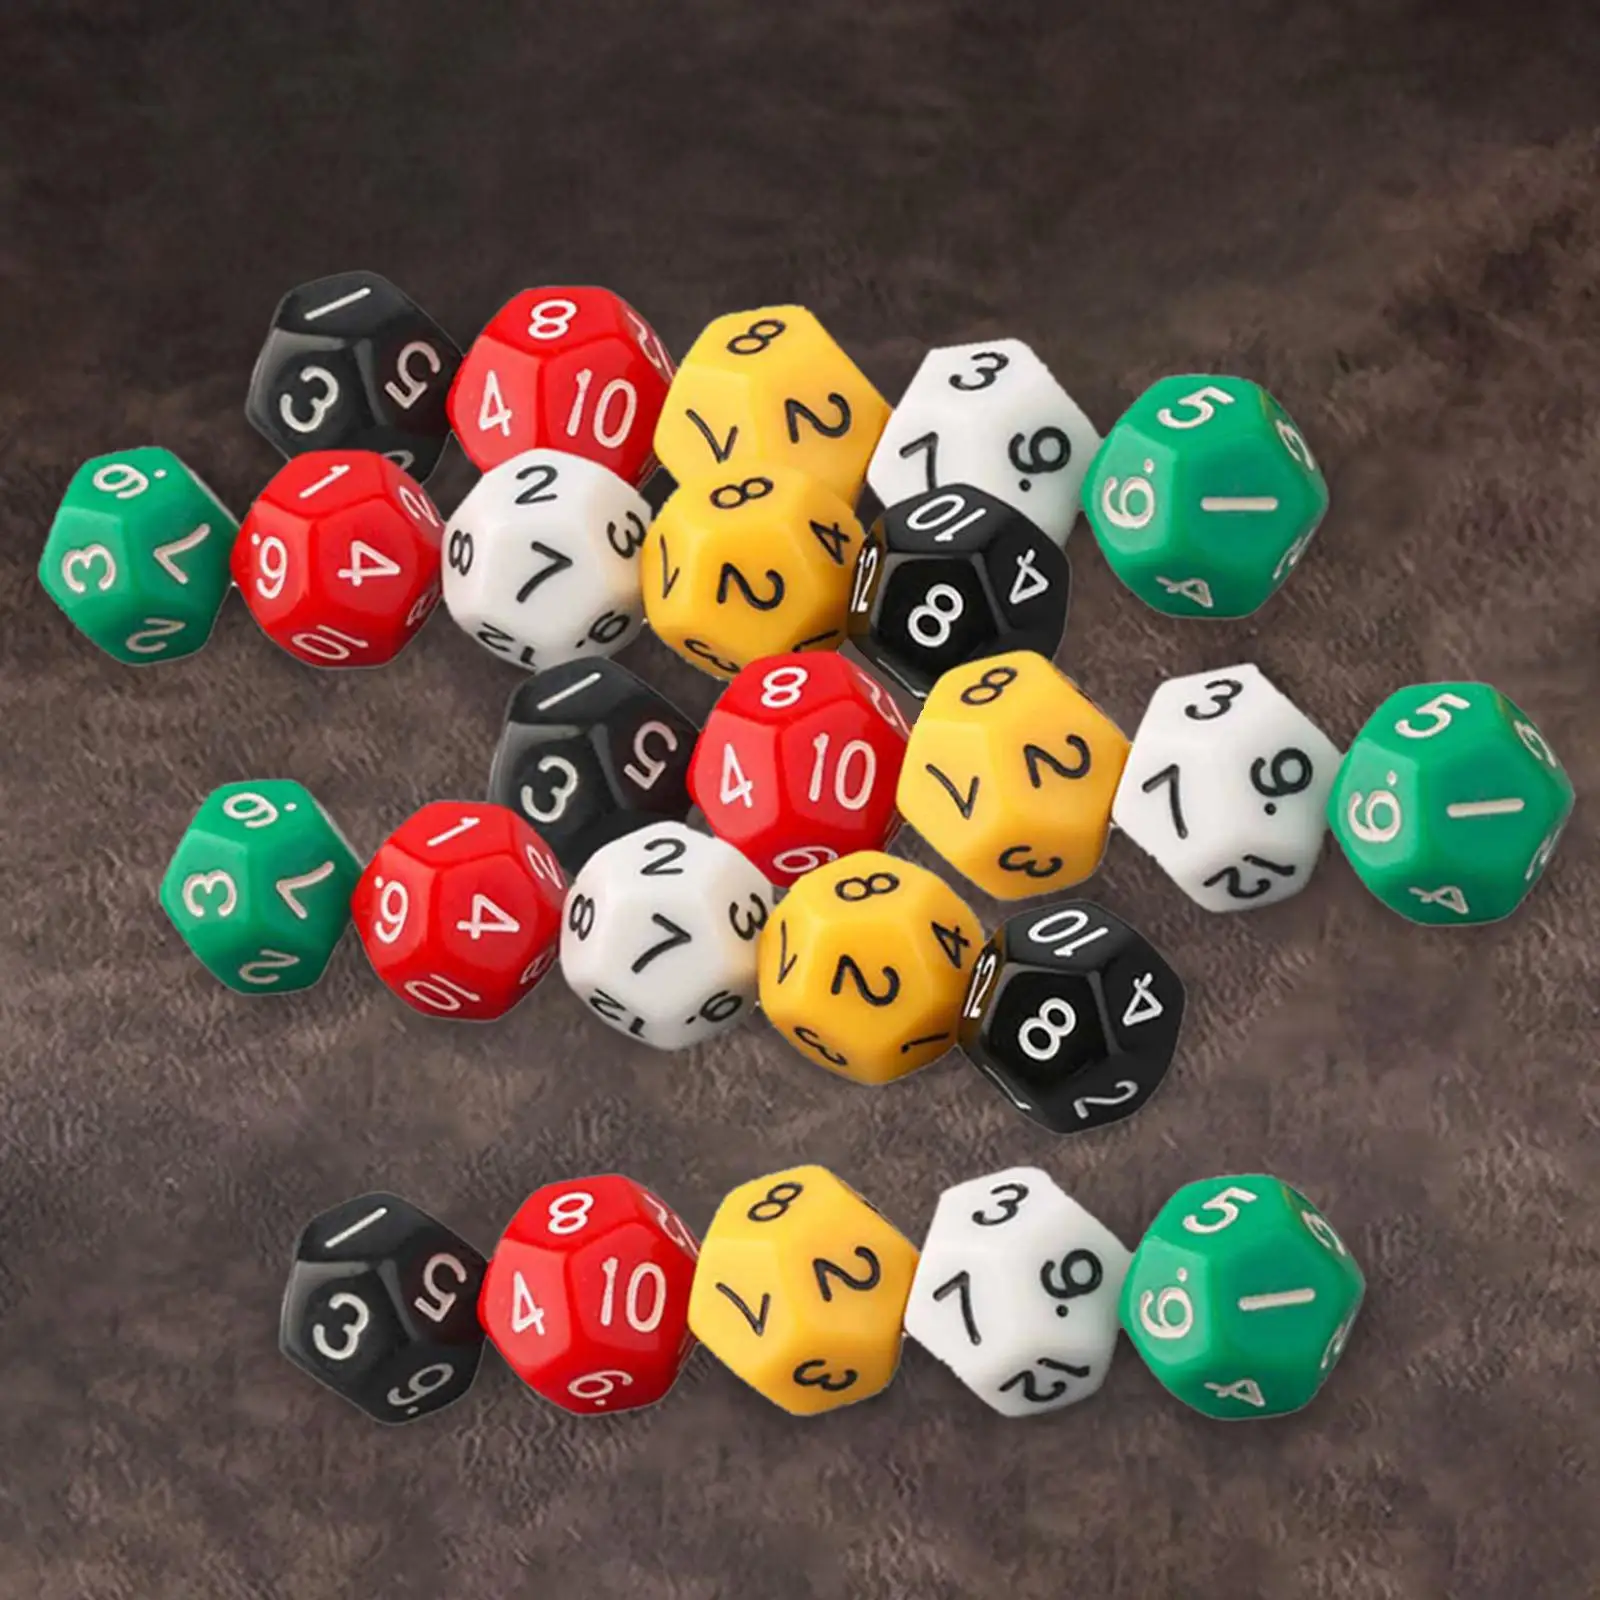 25x Polyhedral Dice Teaching Aids Vintage Style Family Gatherings Collectibles Gift Party Multisided Dice for Role Playing Game